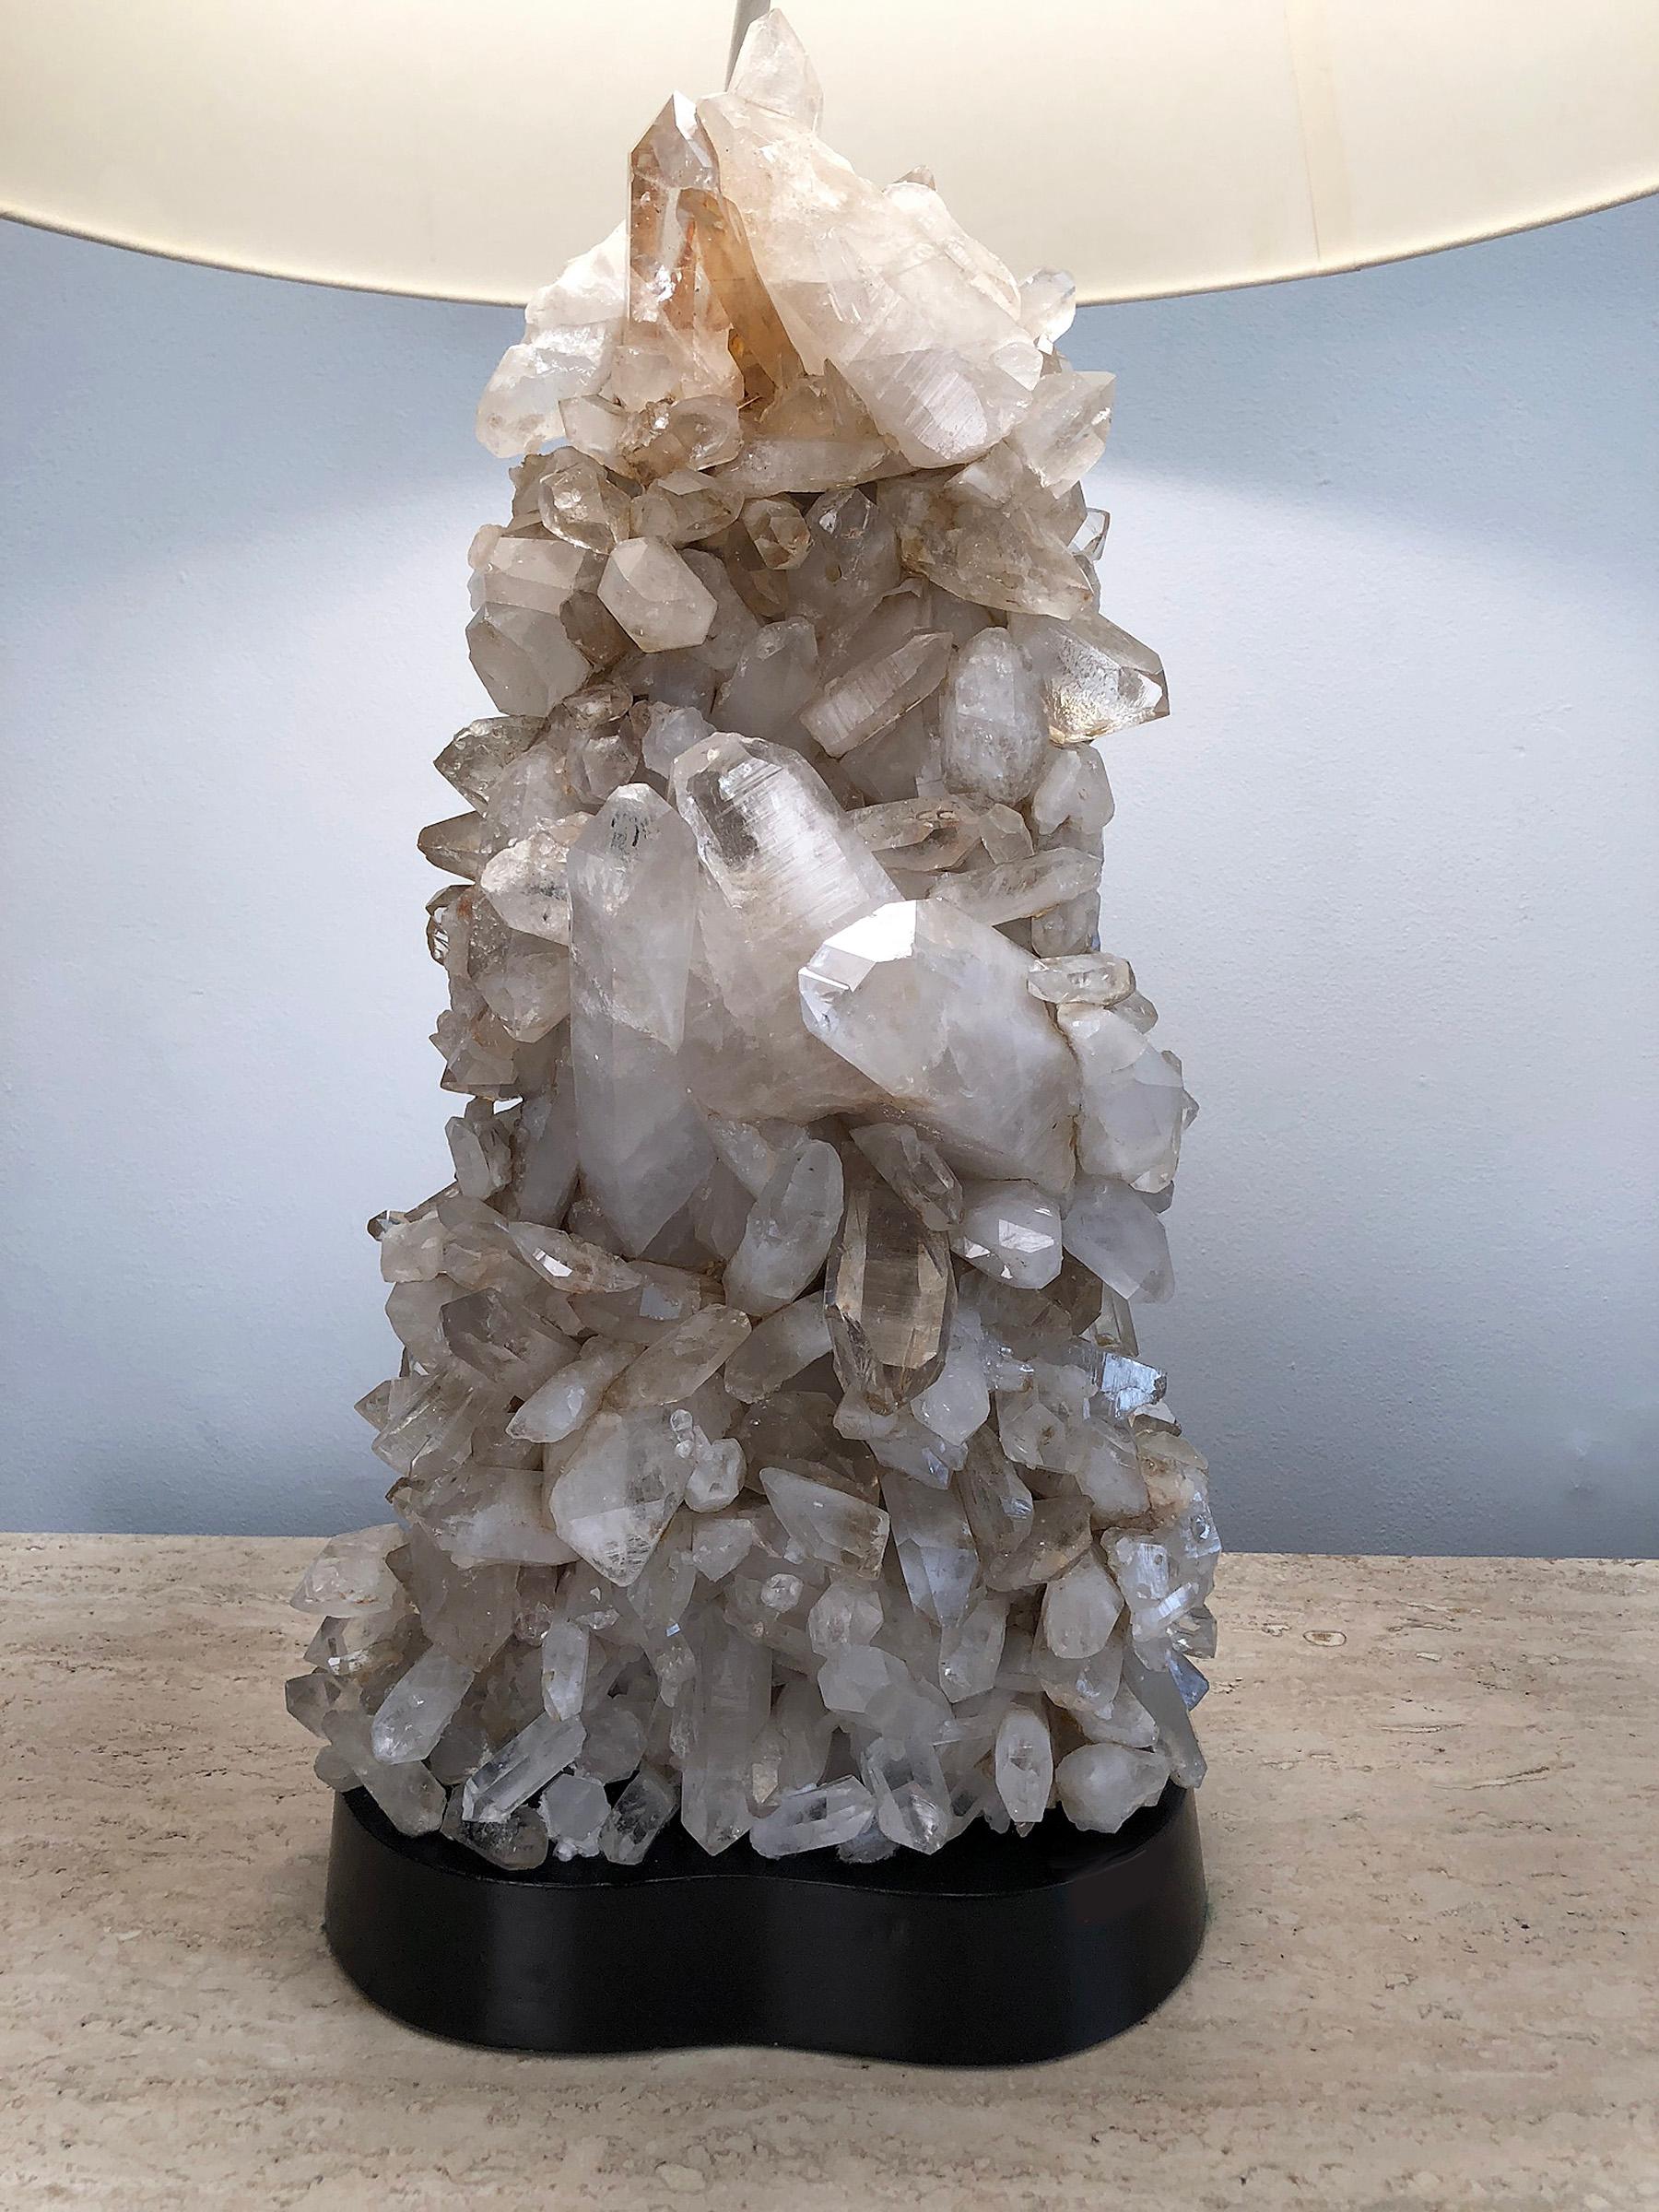 Handcrafted quartz crystal table lamp by Carole Stupell. Base is lacquered wood. Retains original quartz crystal finial. 
Used silk shade measures 23.5